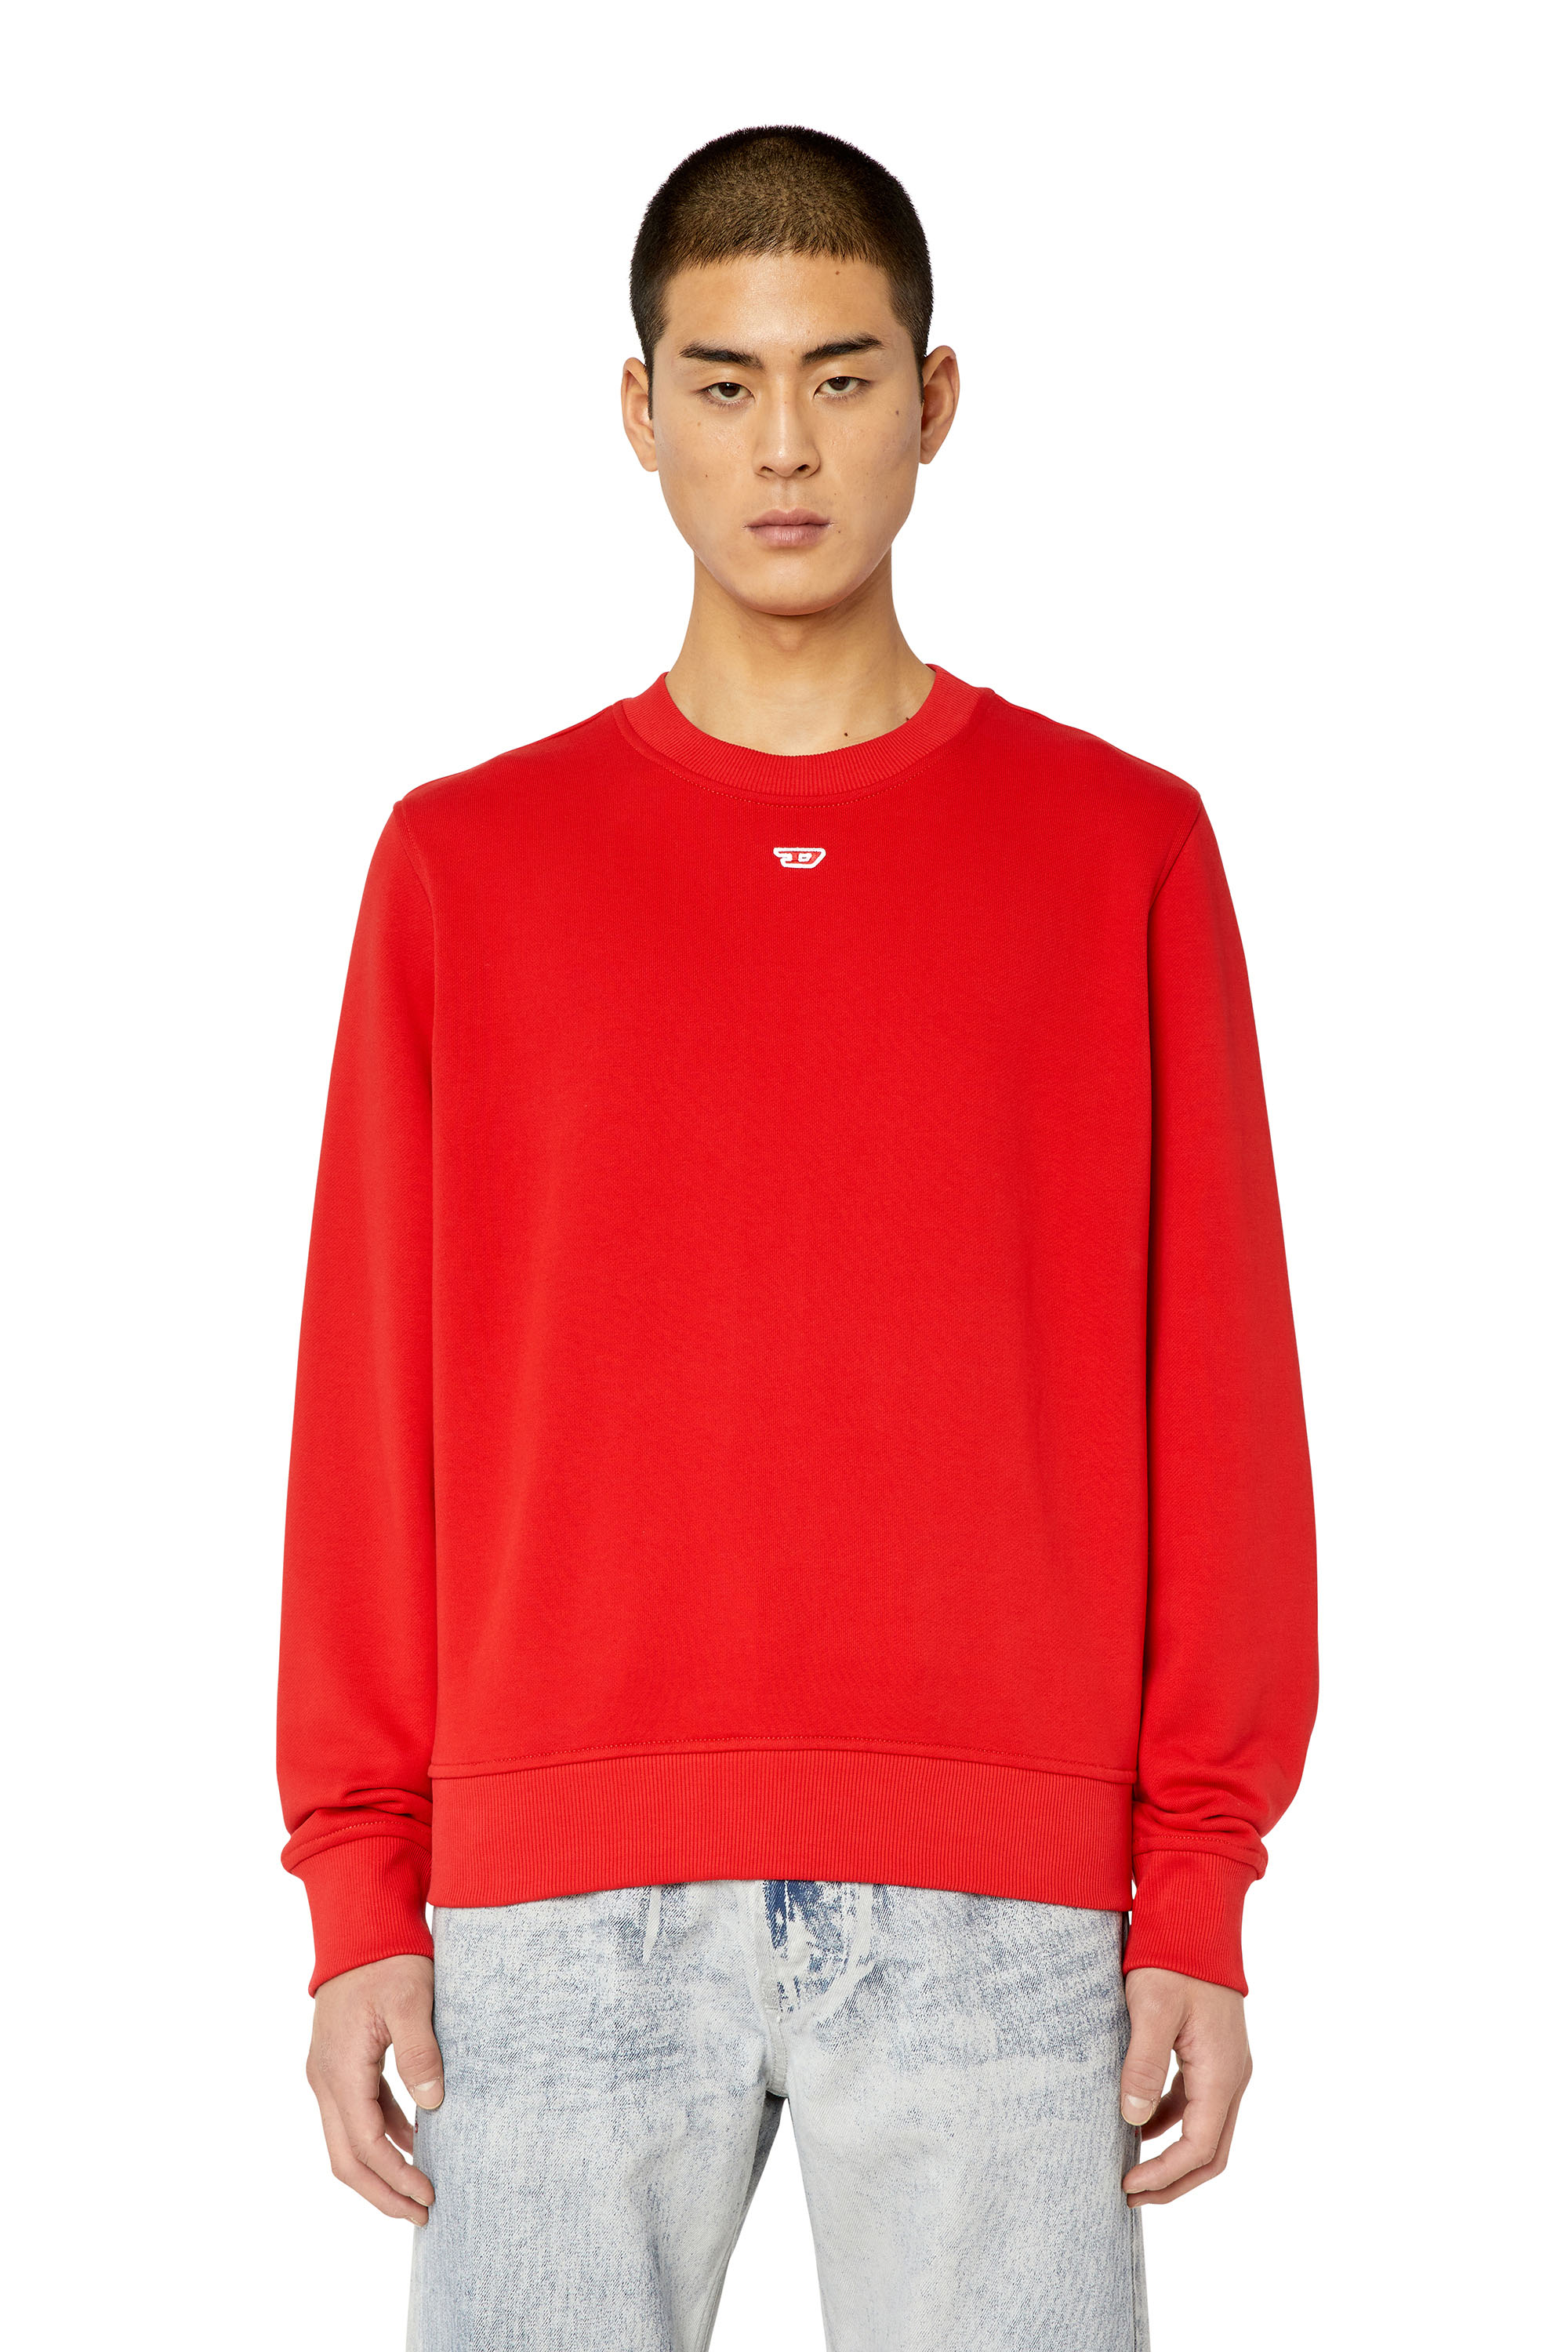 Diesel - S-GINN-D, Unisex Sweatshirt with mini D patch in Red - Image 1